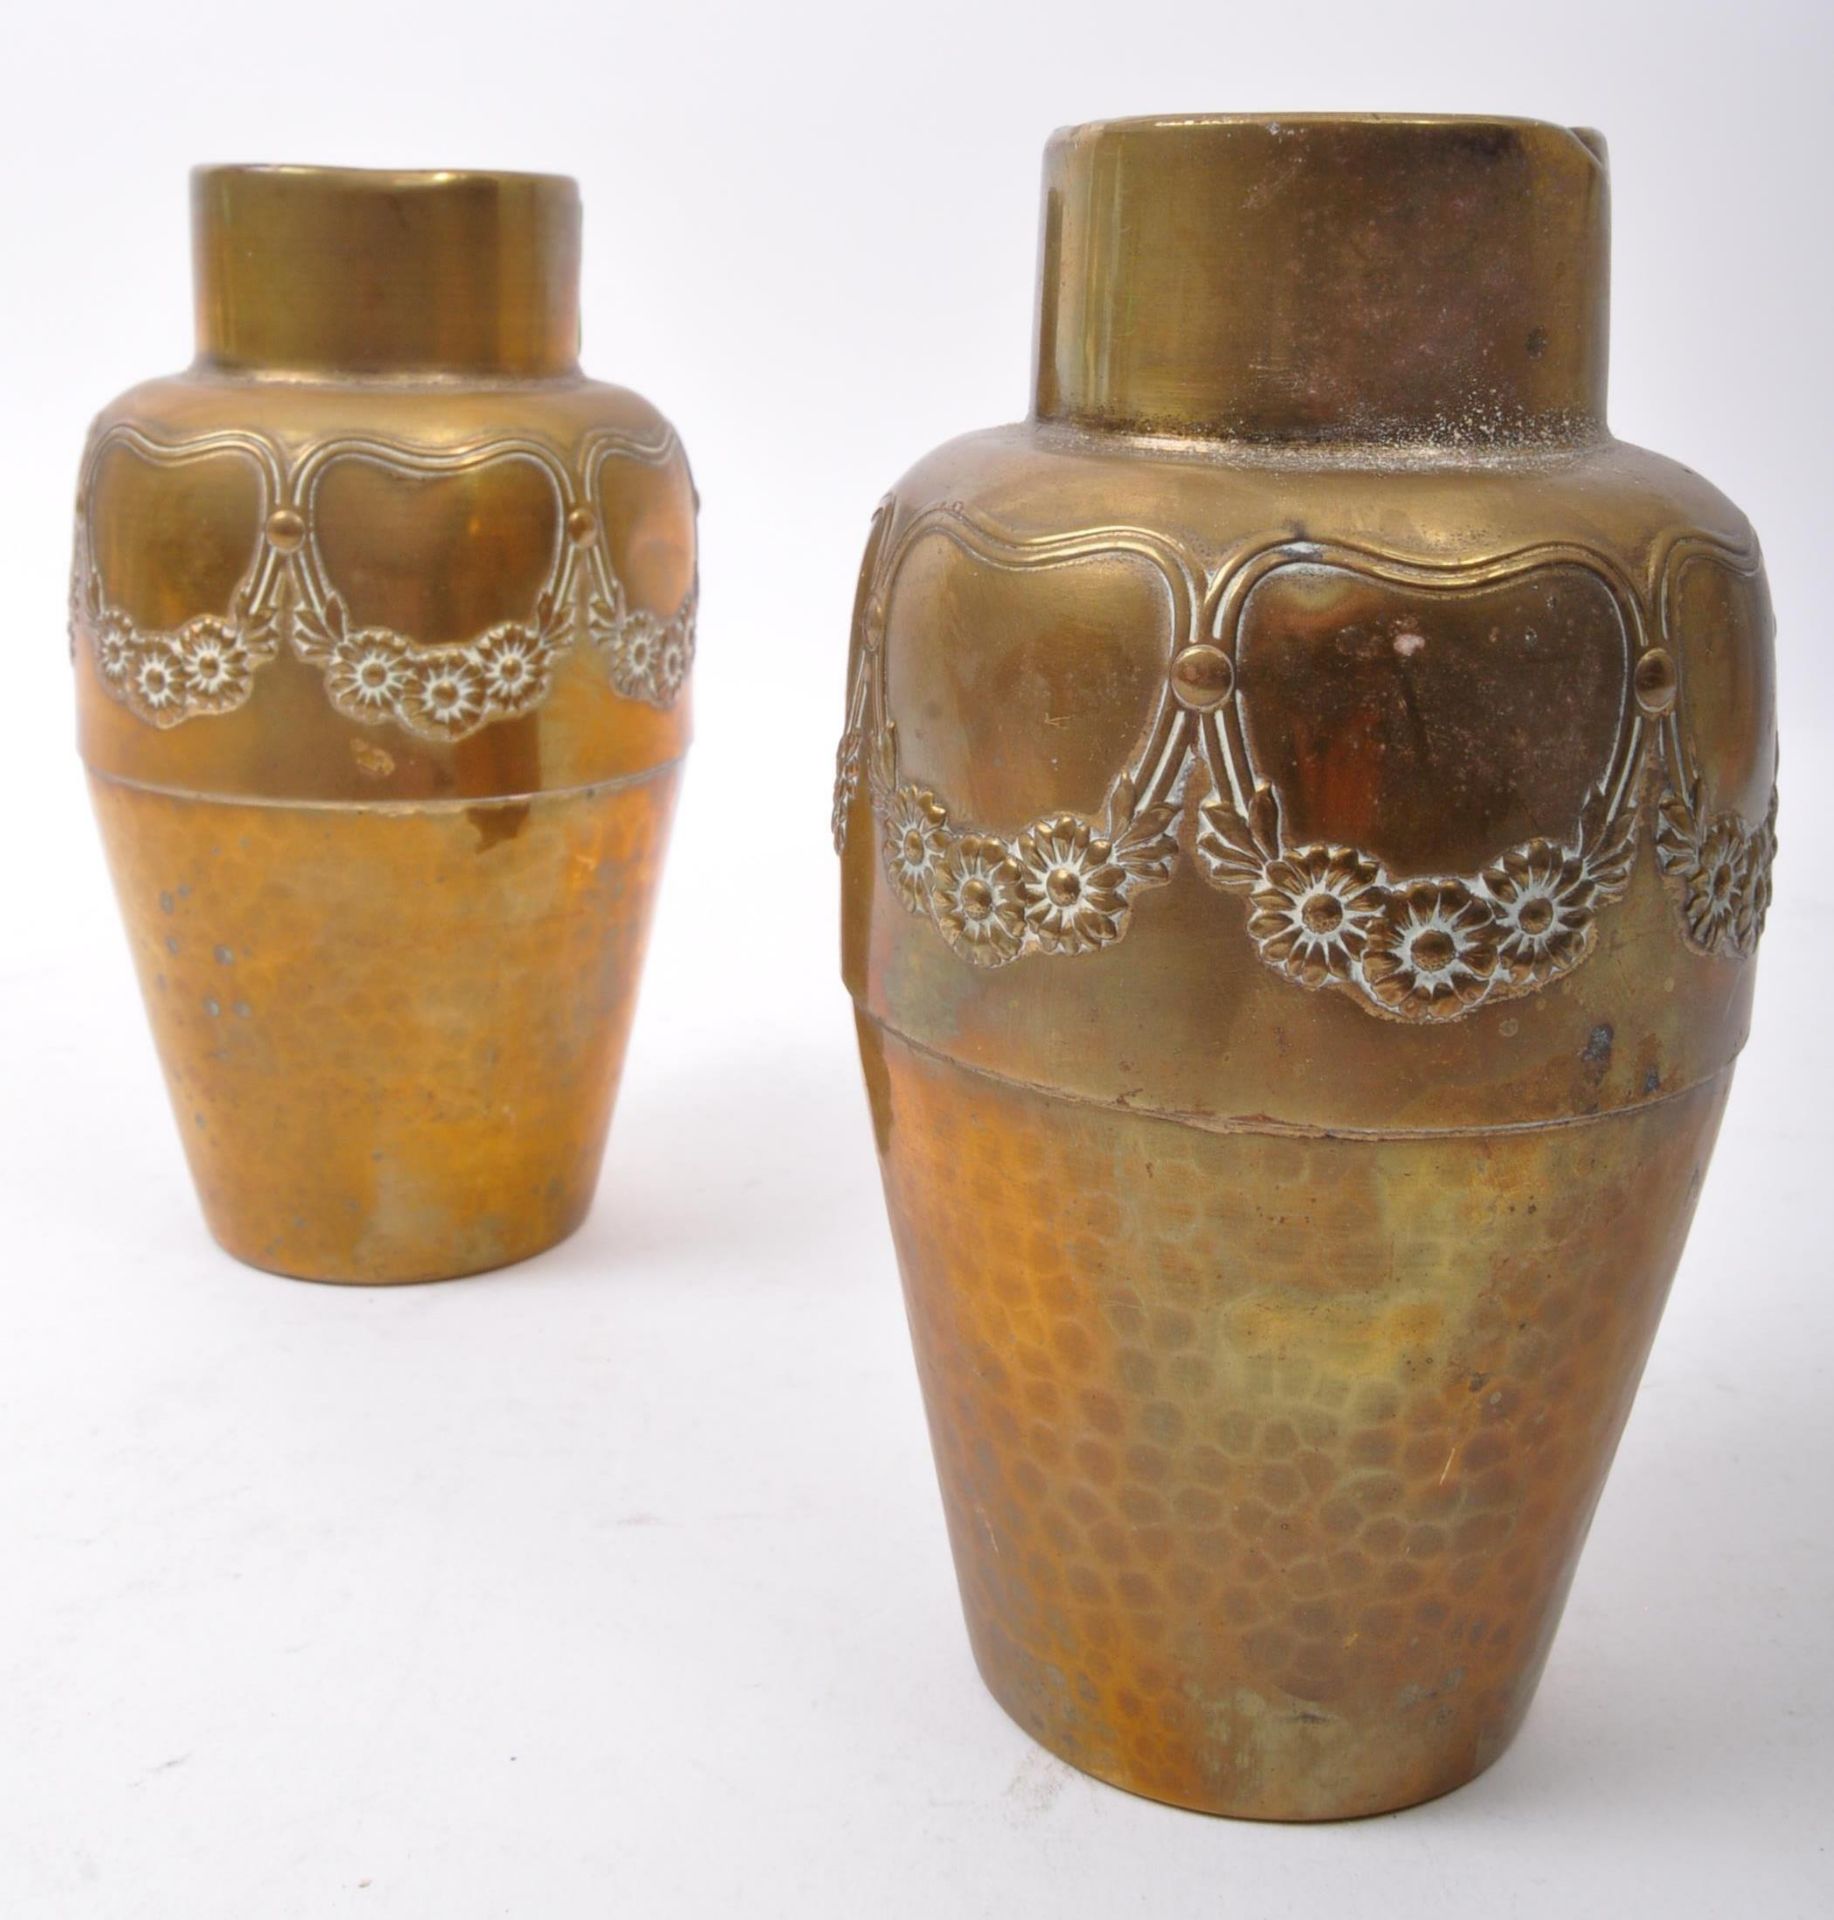 PAIR OF EARLY 20TH CENTURY GERMAN WMF ART NOUVEAU VASES - Image 2 of 6